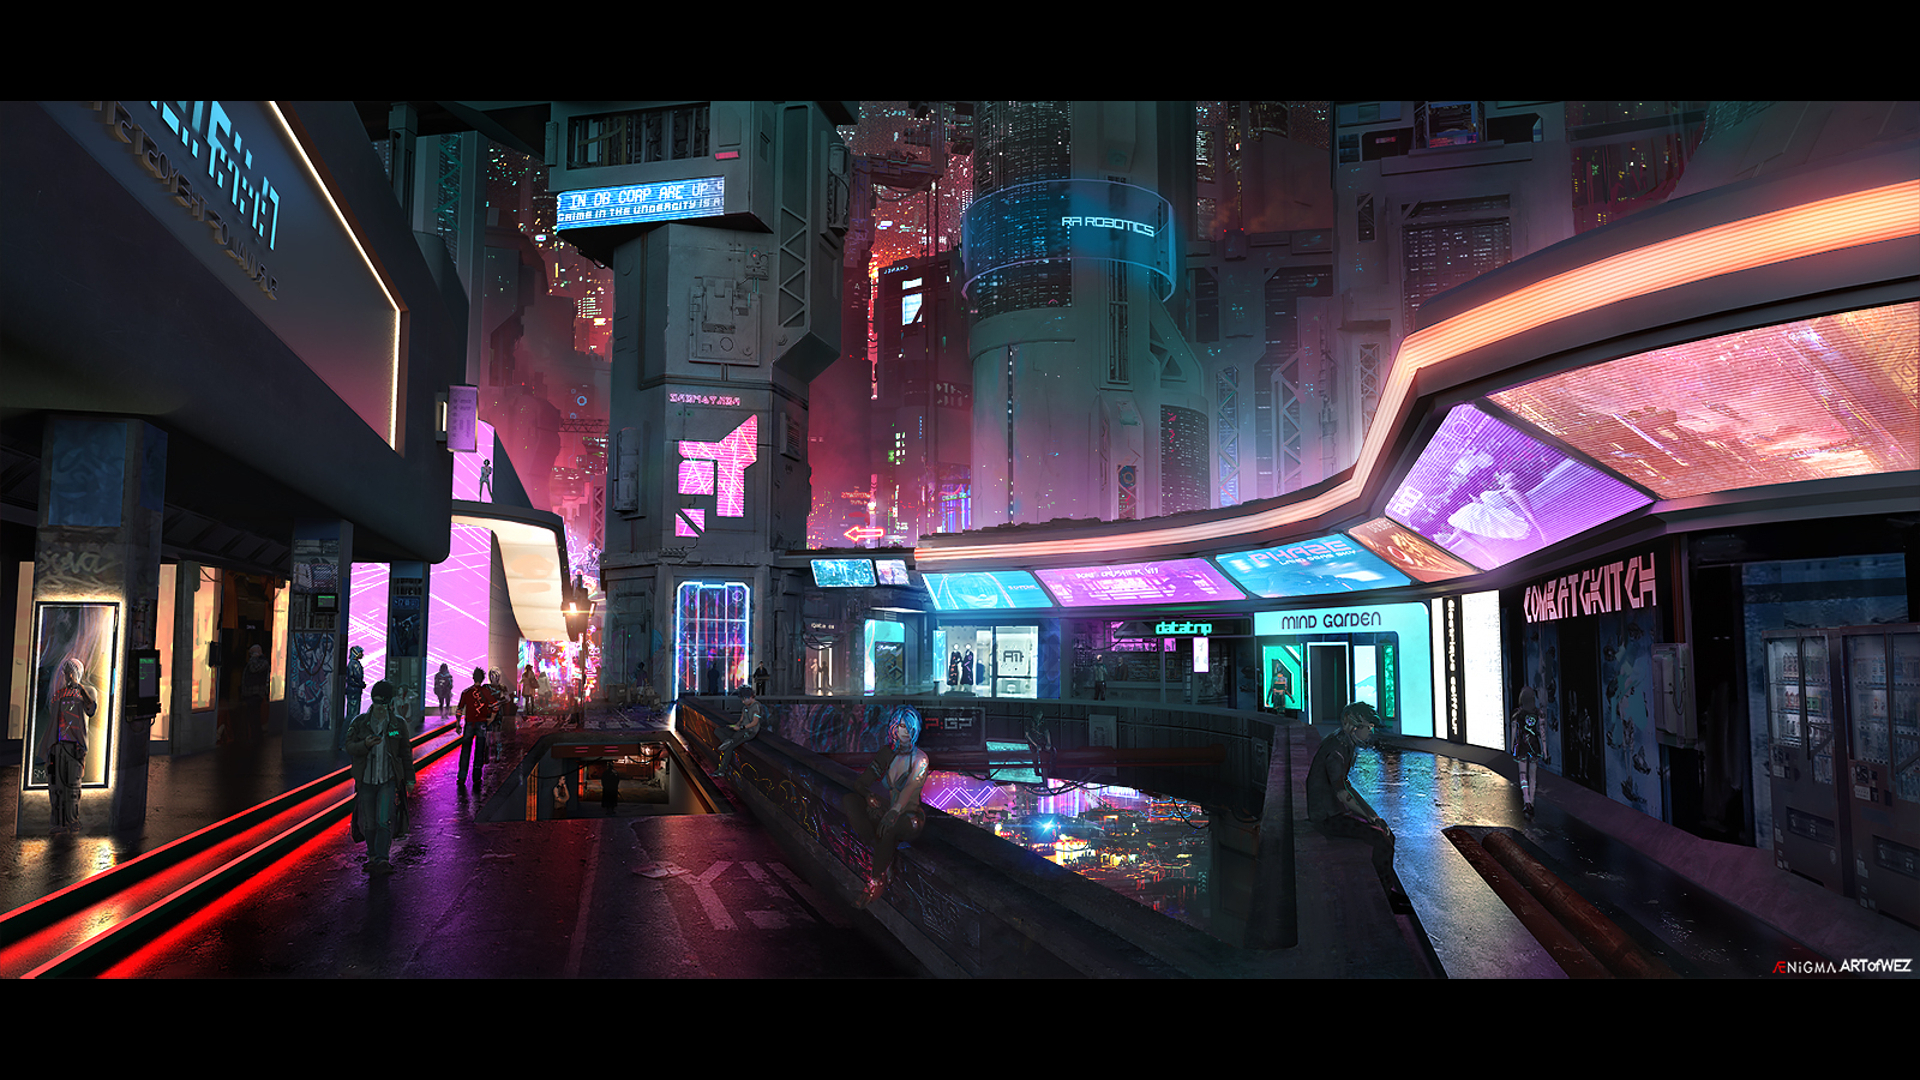 The Neon District at Night by wez